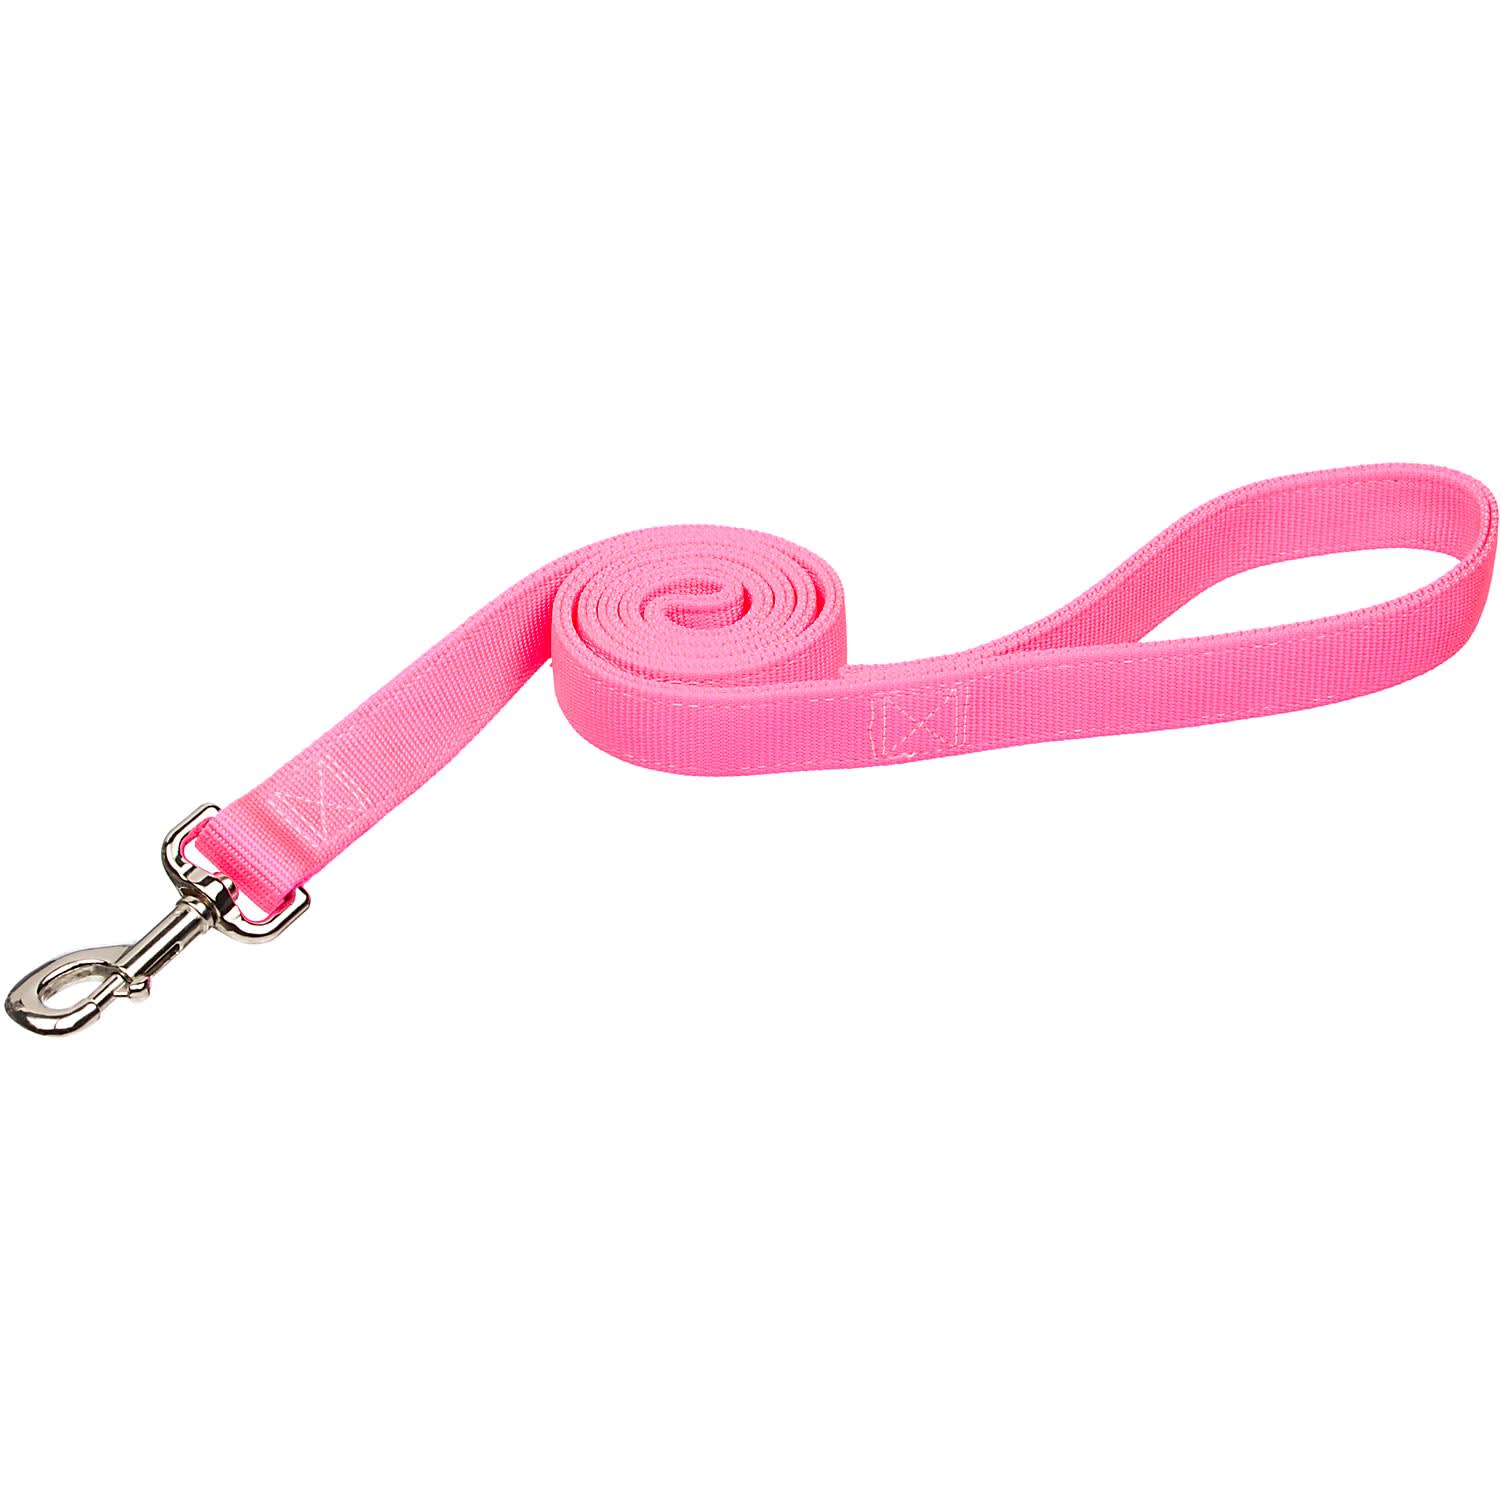 Coastal Pet Double Ply Nylon Personalized Dog Leash in Neon Pink, 6